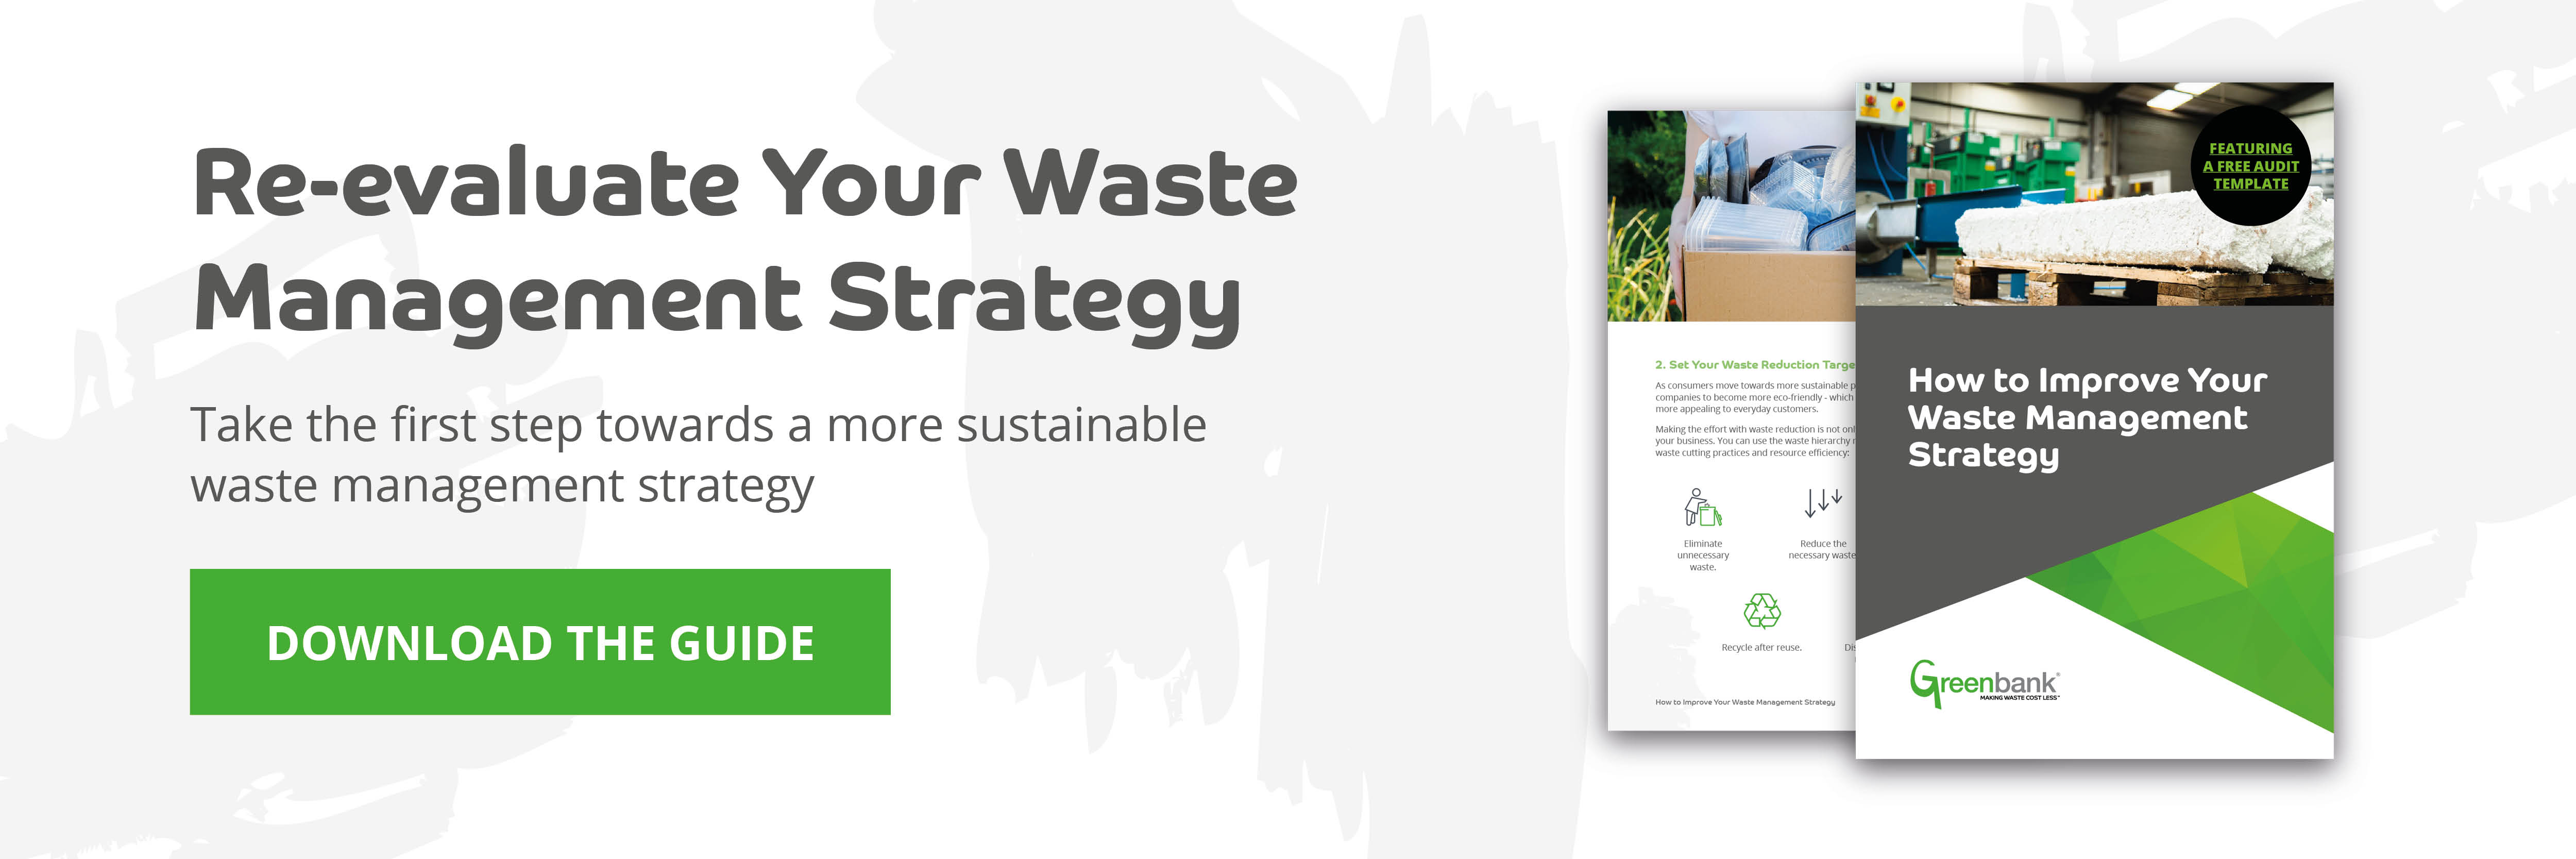 Waste Management Strategy Guide